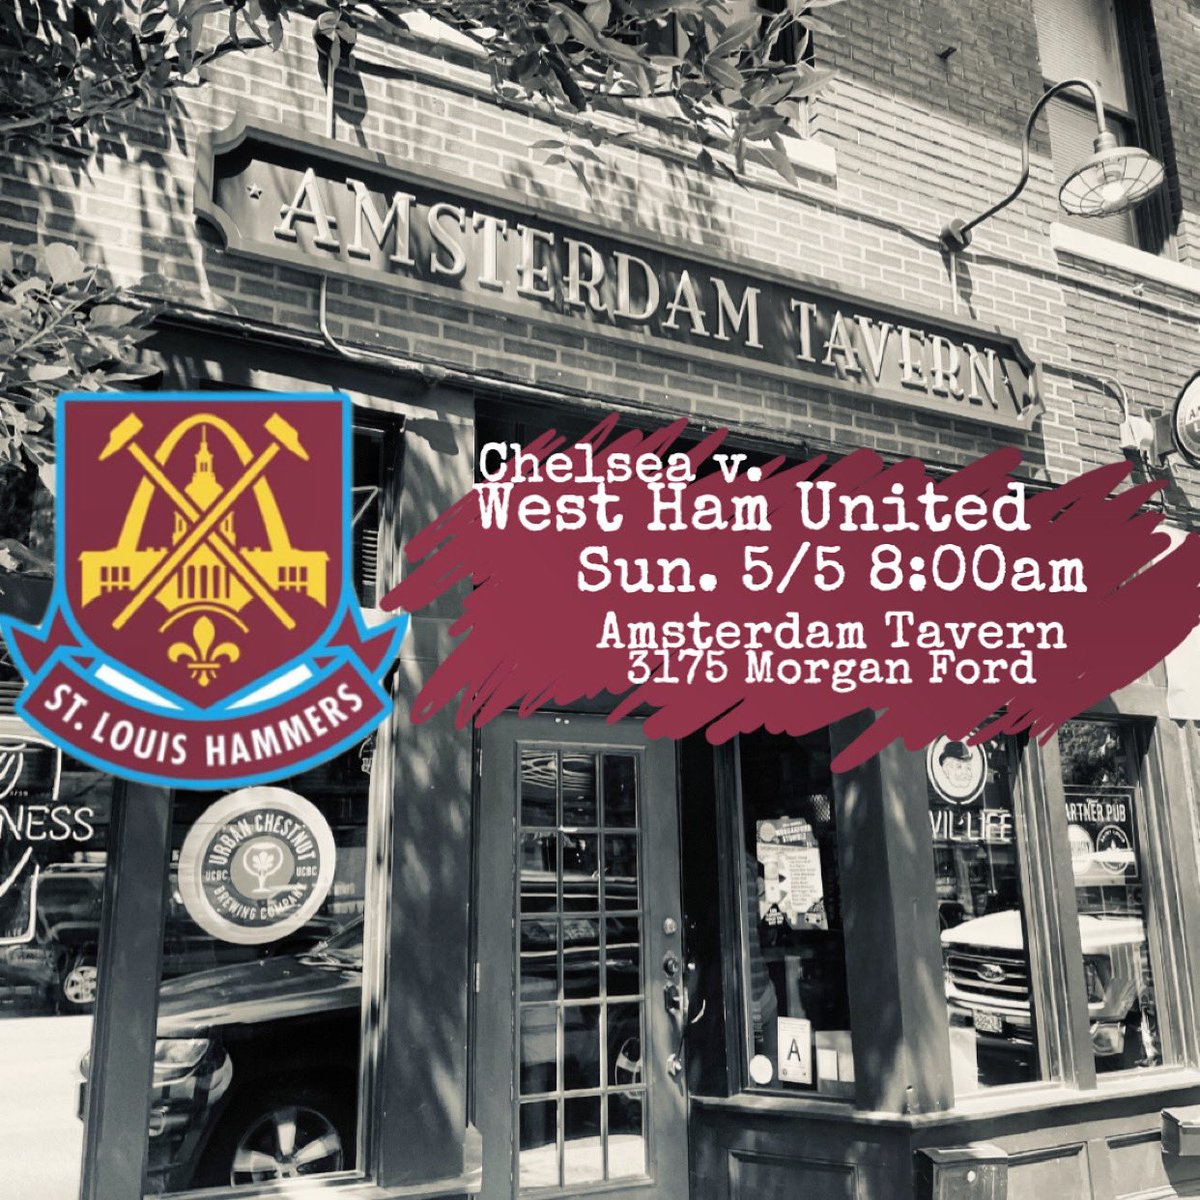 Big matchup tomorrow and a chance to jump ahead to 8th. See you at @Amsterdamtavern 8:00am